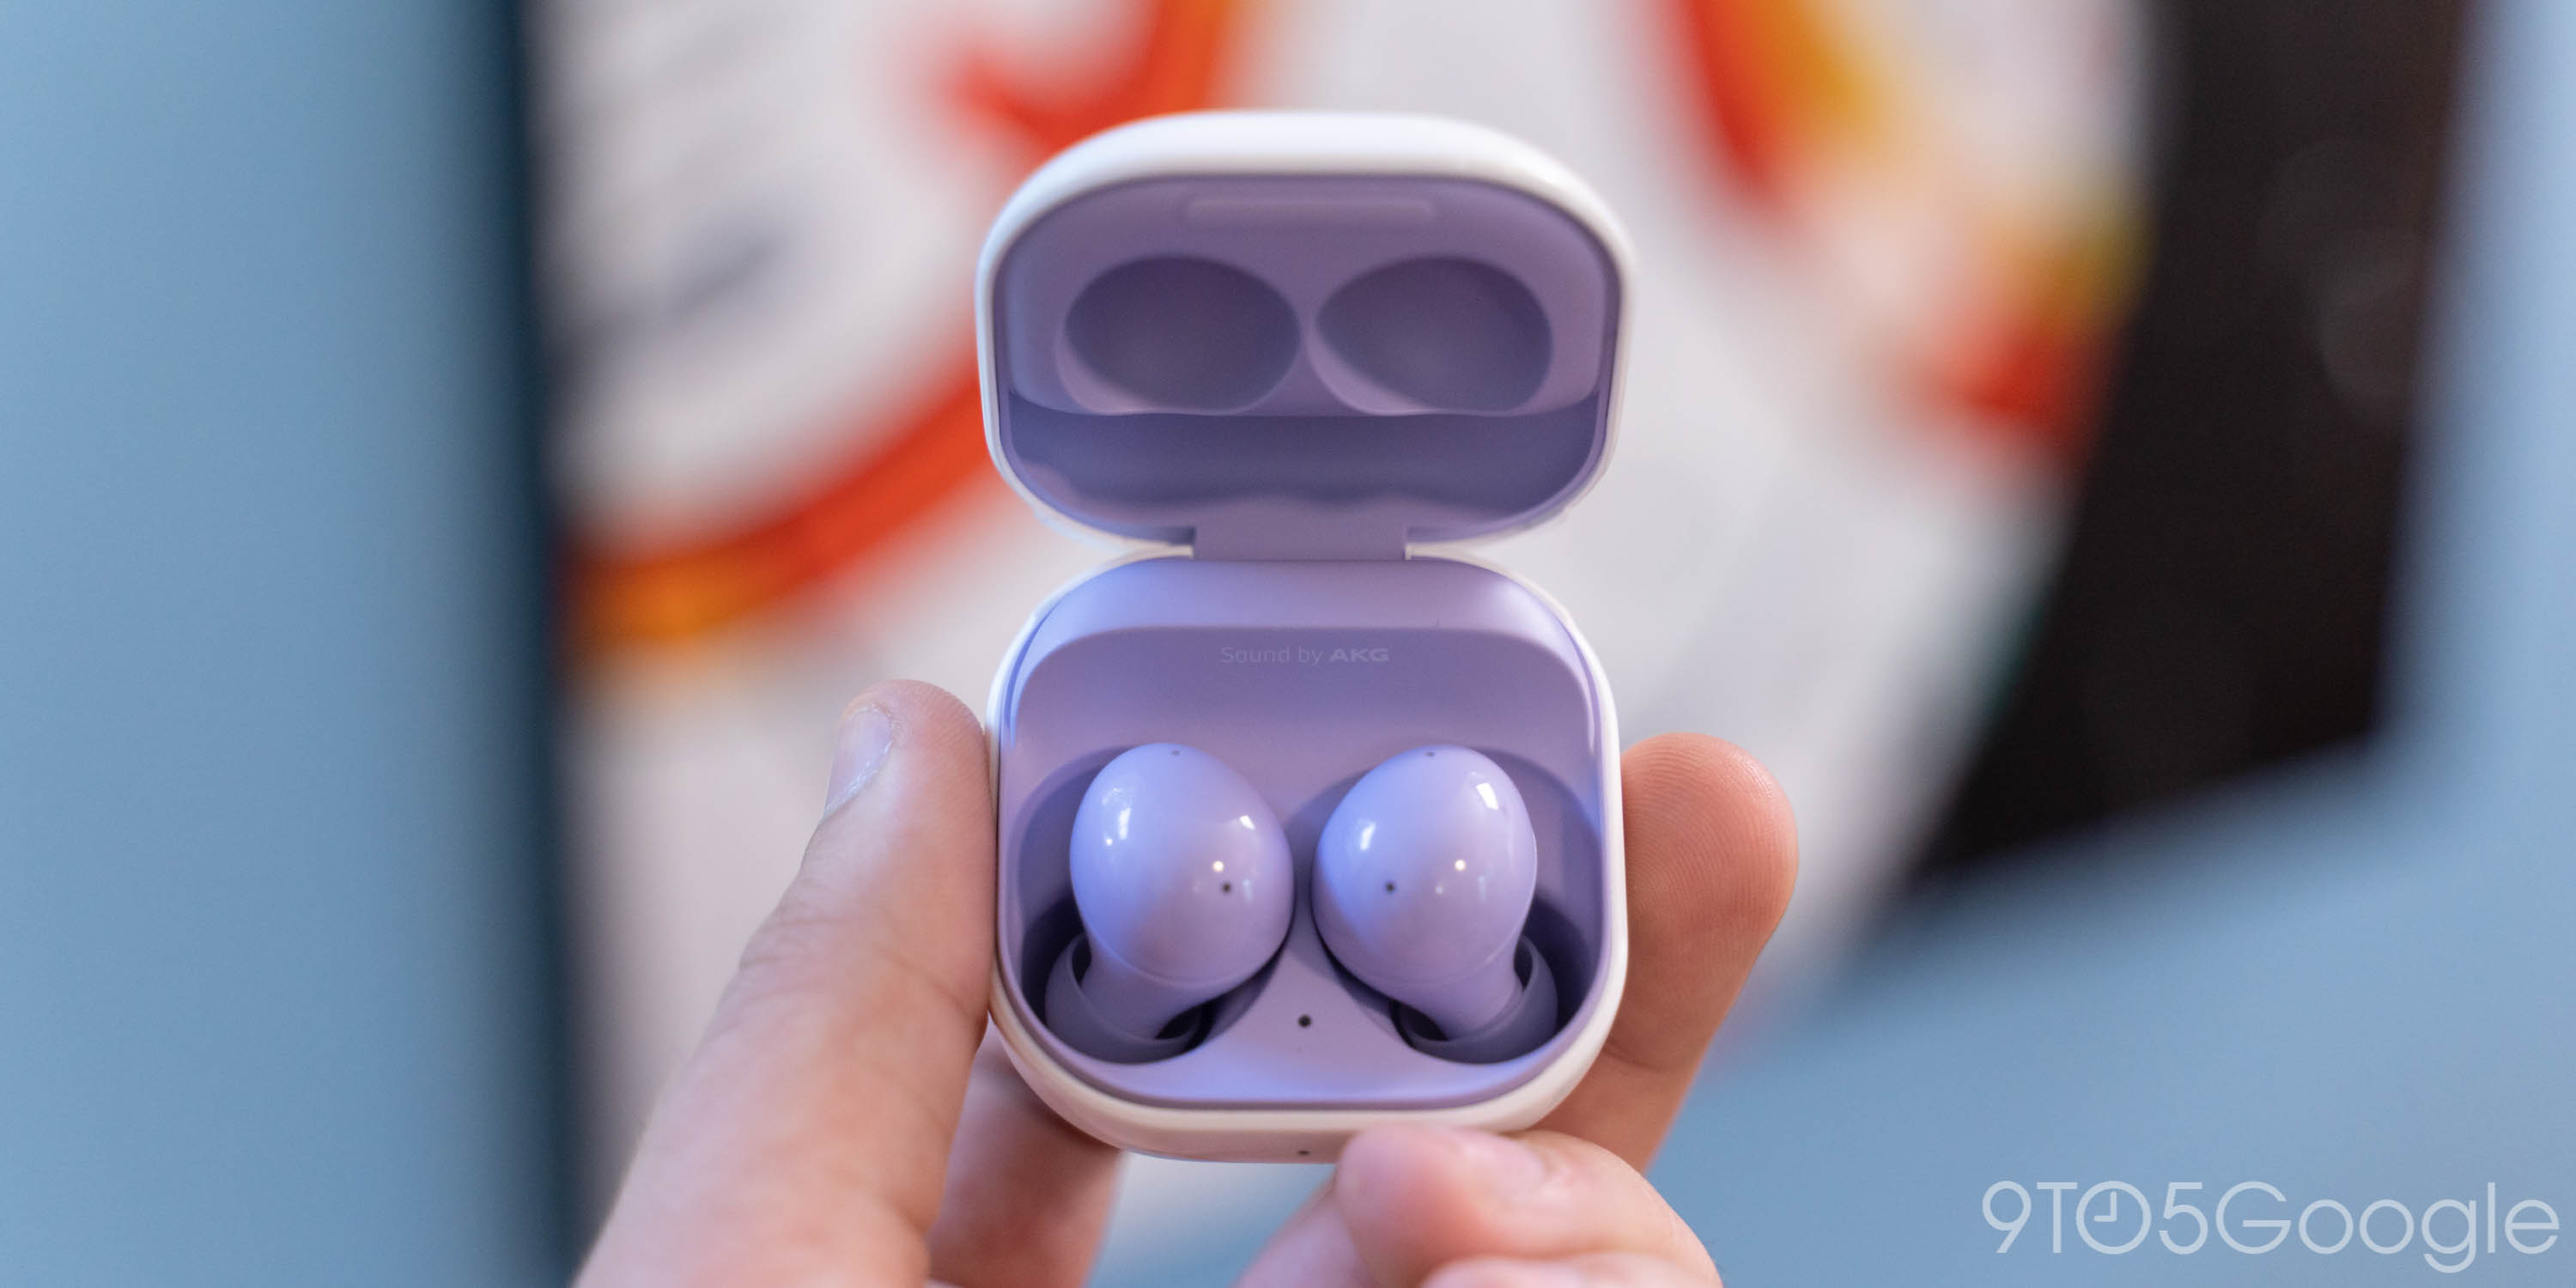 Galaxy Buds apps are crashing left and right - 9to5Google